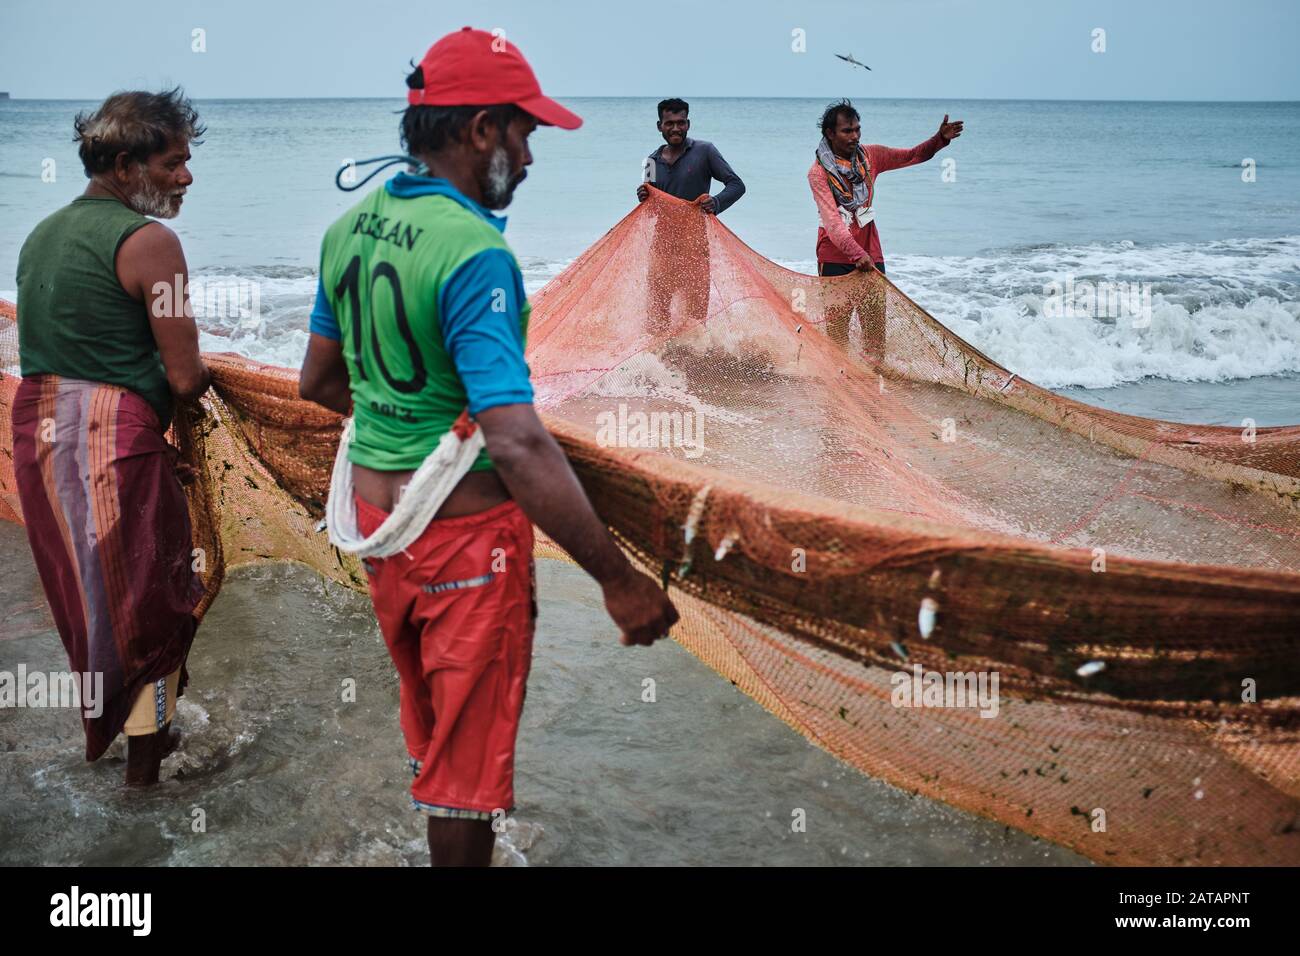 Fishermen pulling the nets out of the ocean on the beach in Sri